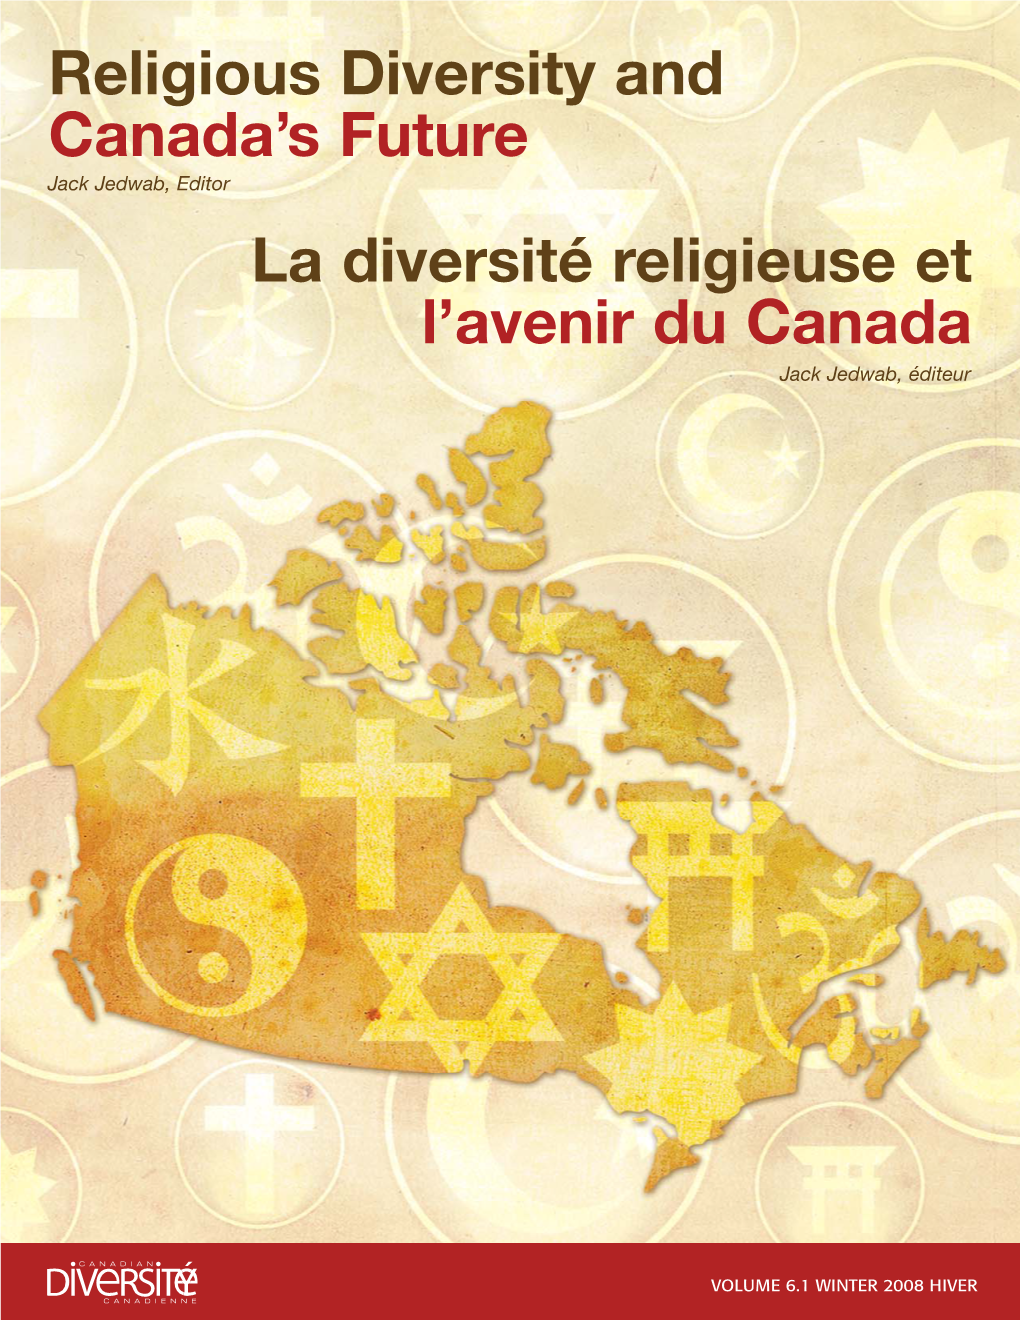 Religious Youth Radicalization in Canada 116 the Sacred Public Sphere: by Paul Bramadat and Scot Wortley Praying for Secularism by Sarah Elgazzar